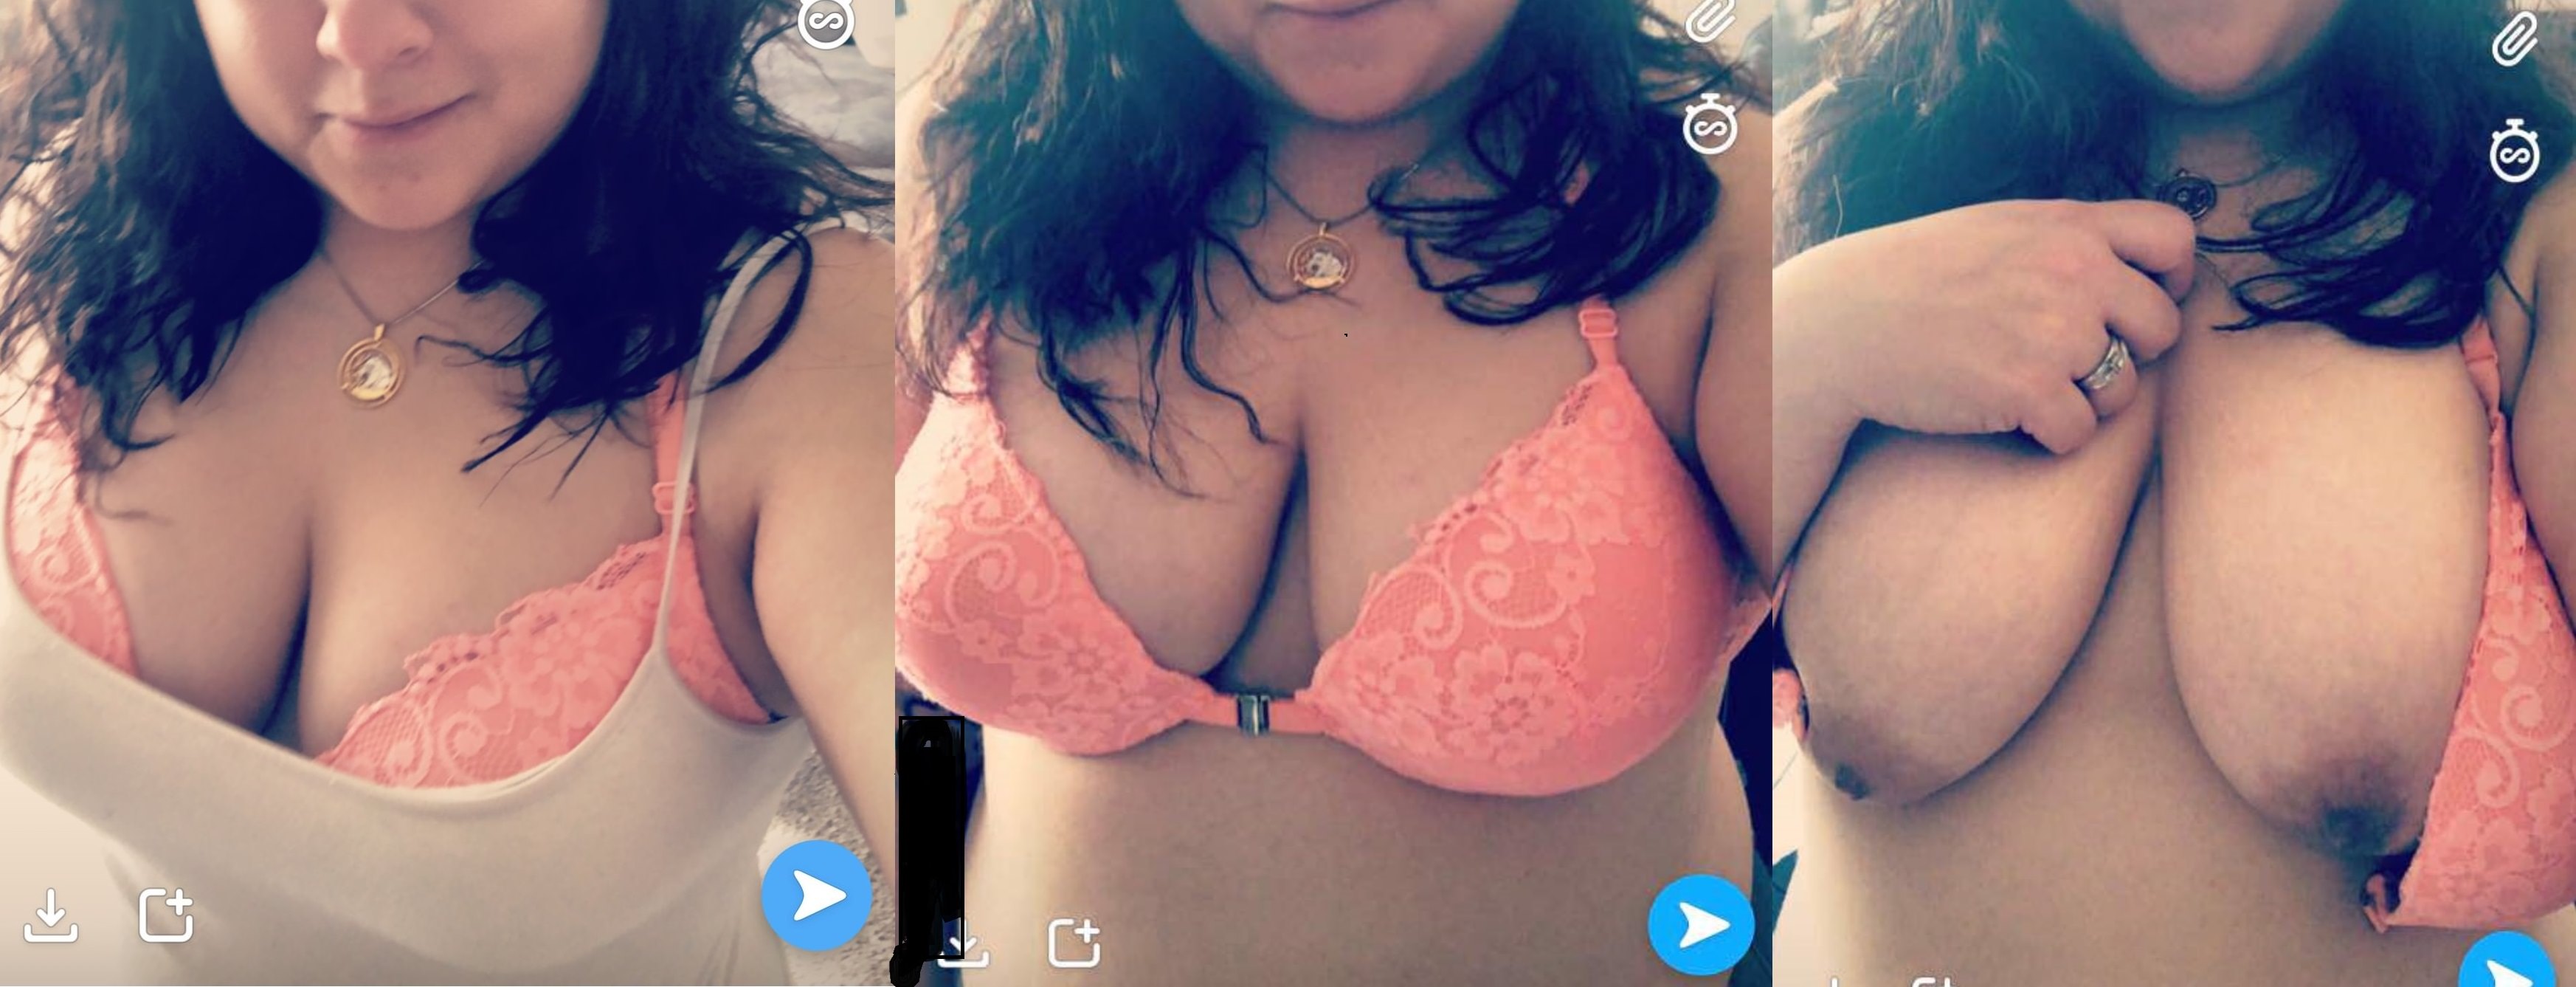 Front Close Bra Porn - why aren't front clasp bras more popular? Porn Pic - EPORNER